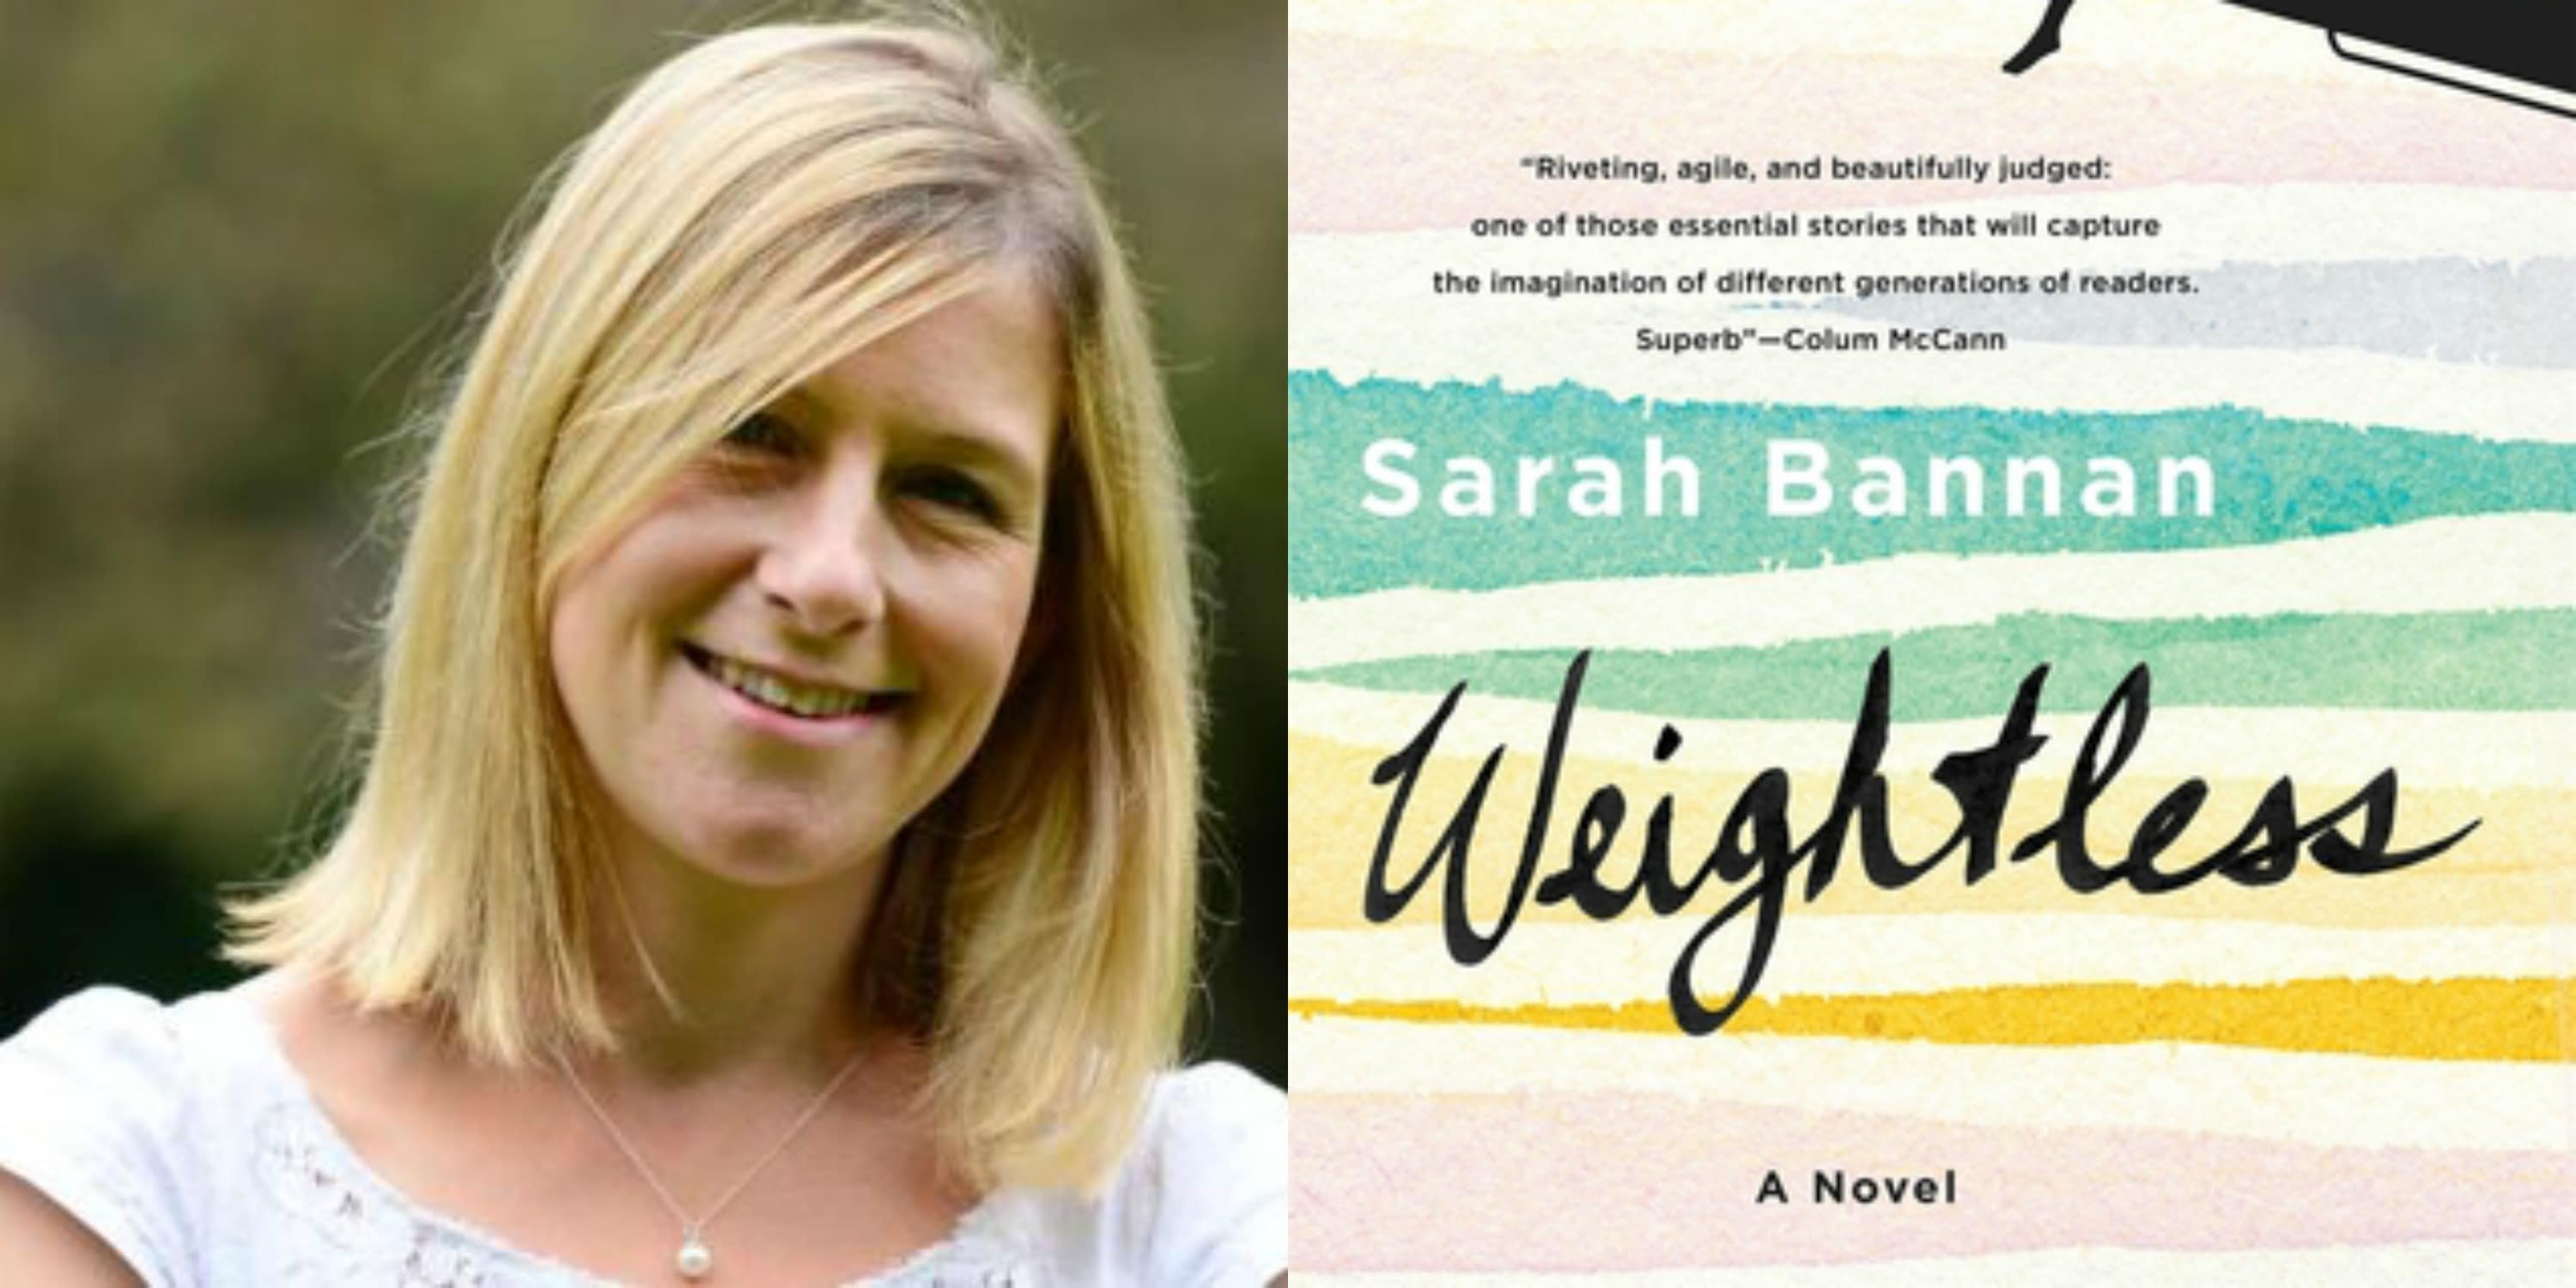 Sundays With Writers: Weightless by Sarah Bannan